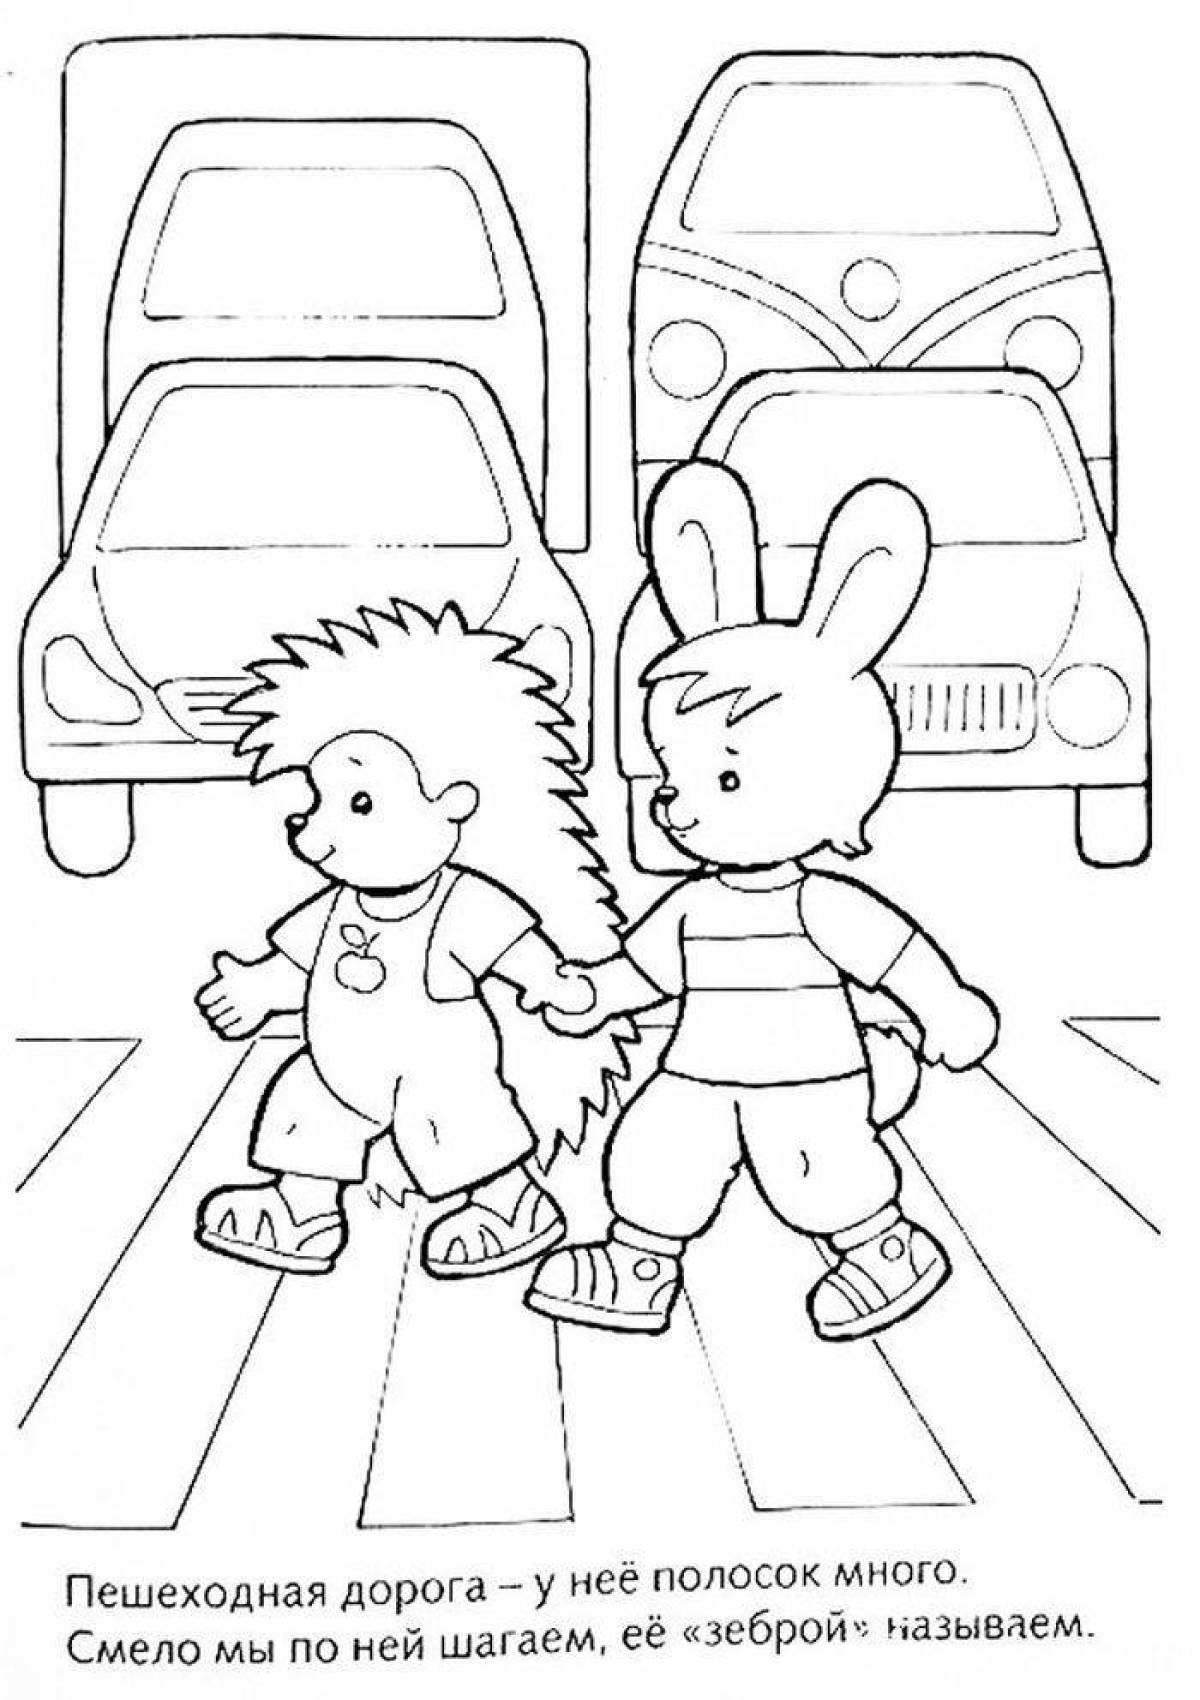 A fun coloring book of traffic rules for kids